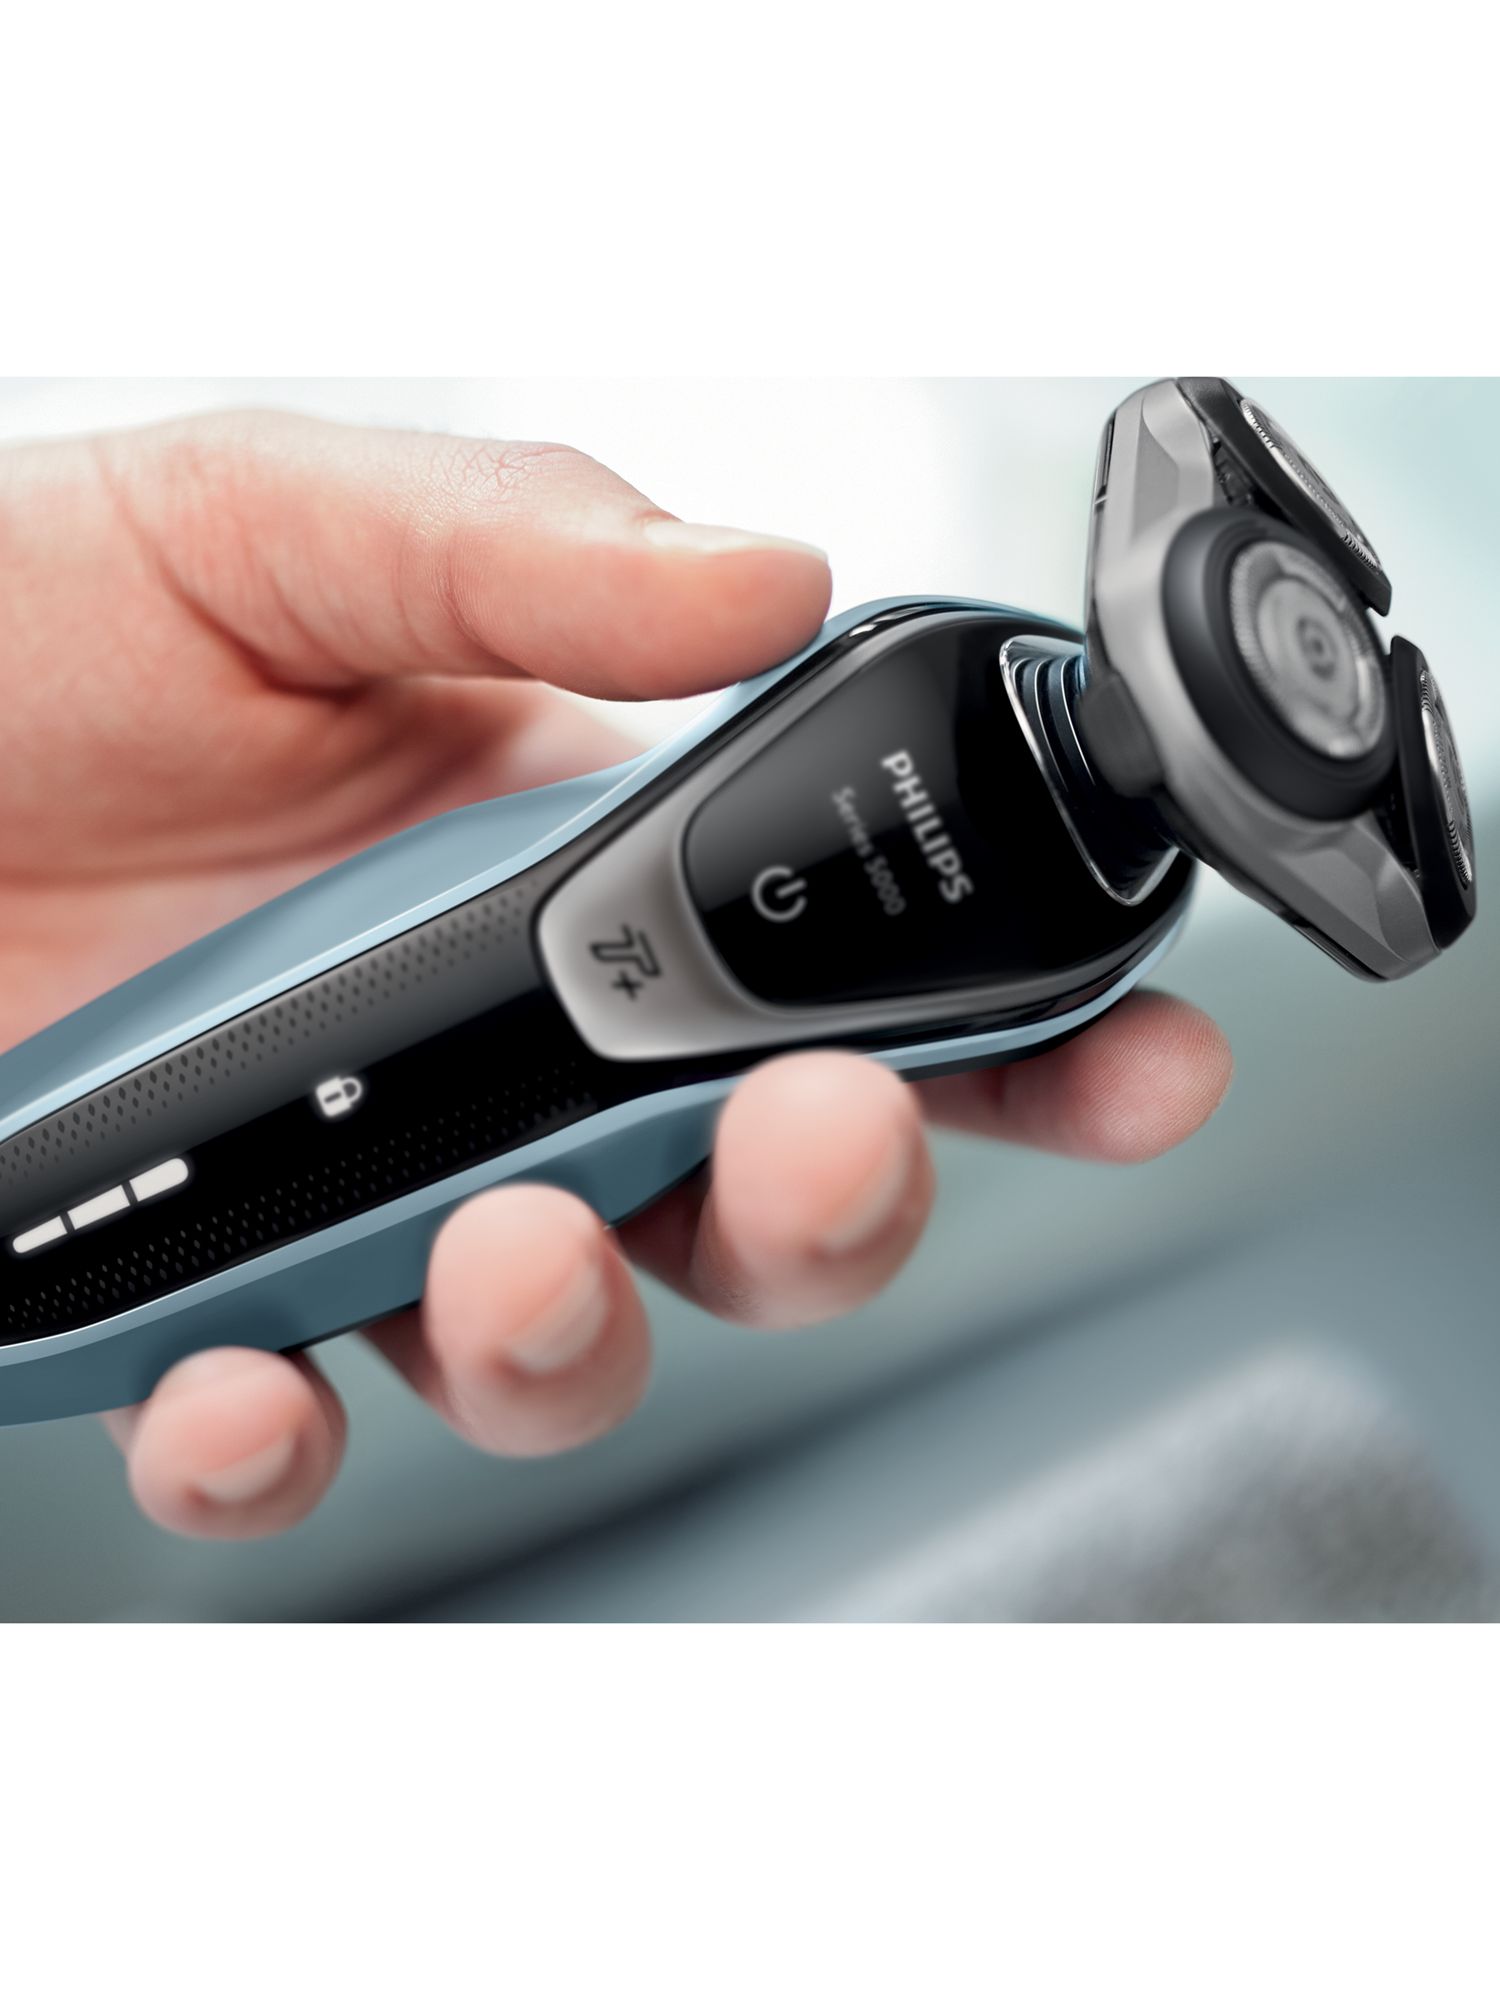 series 5000 philips shaver